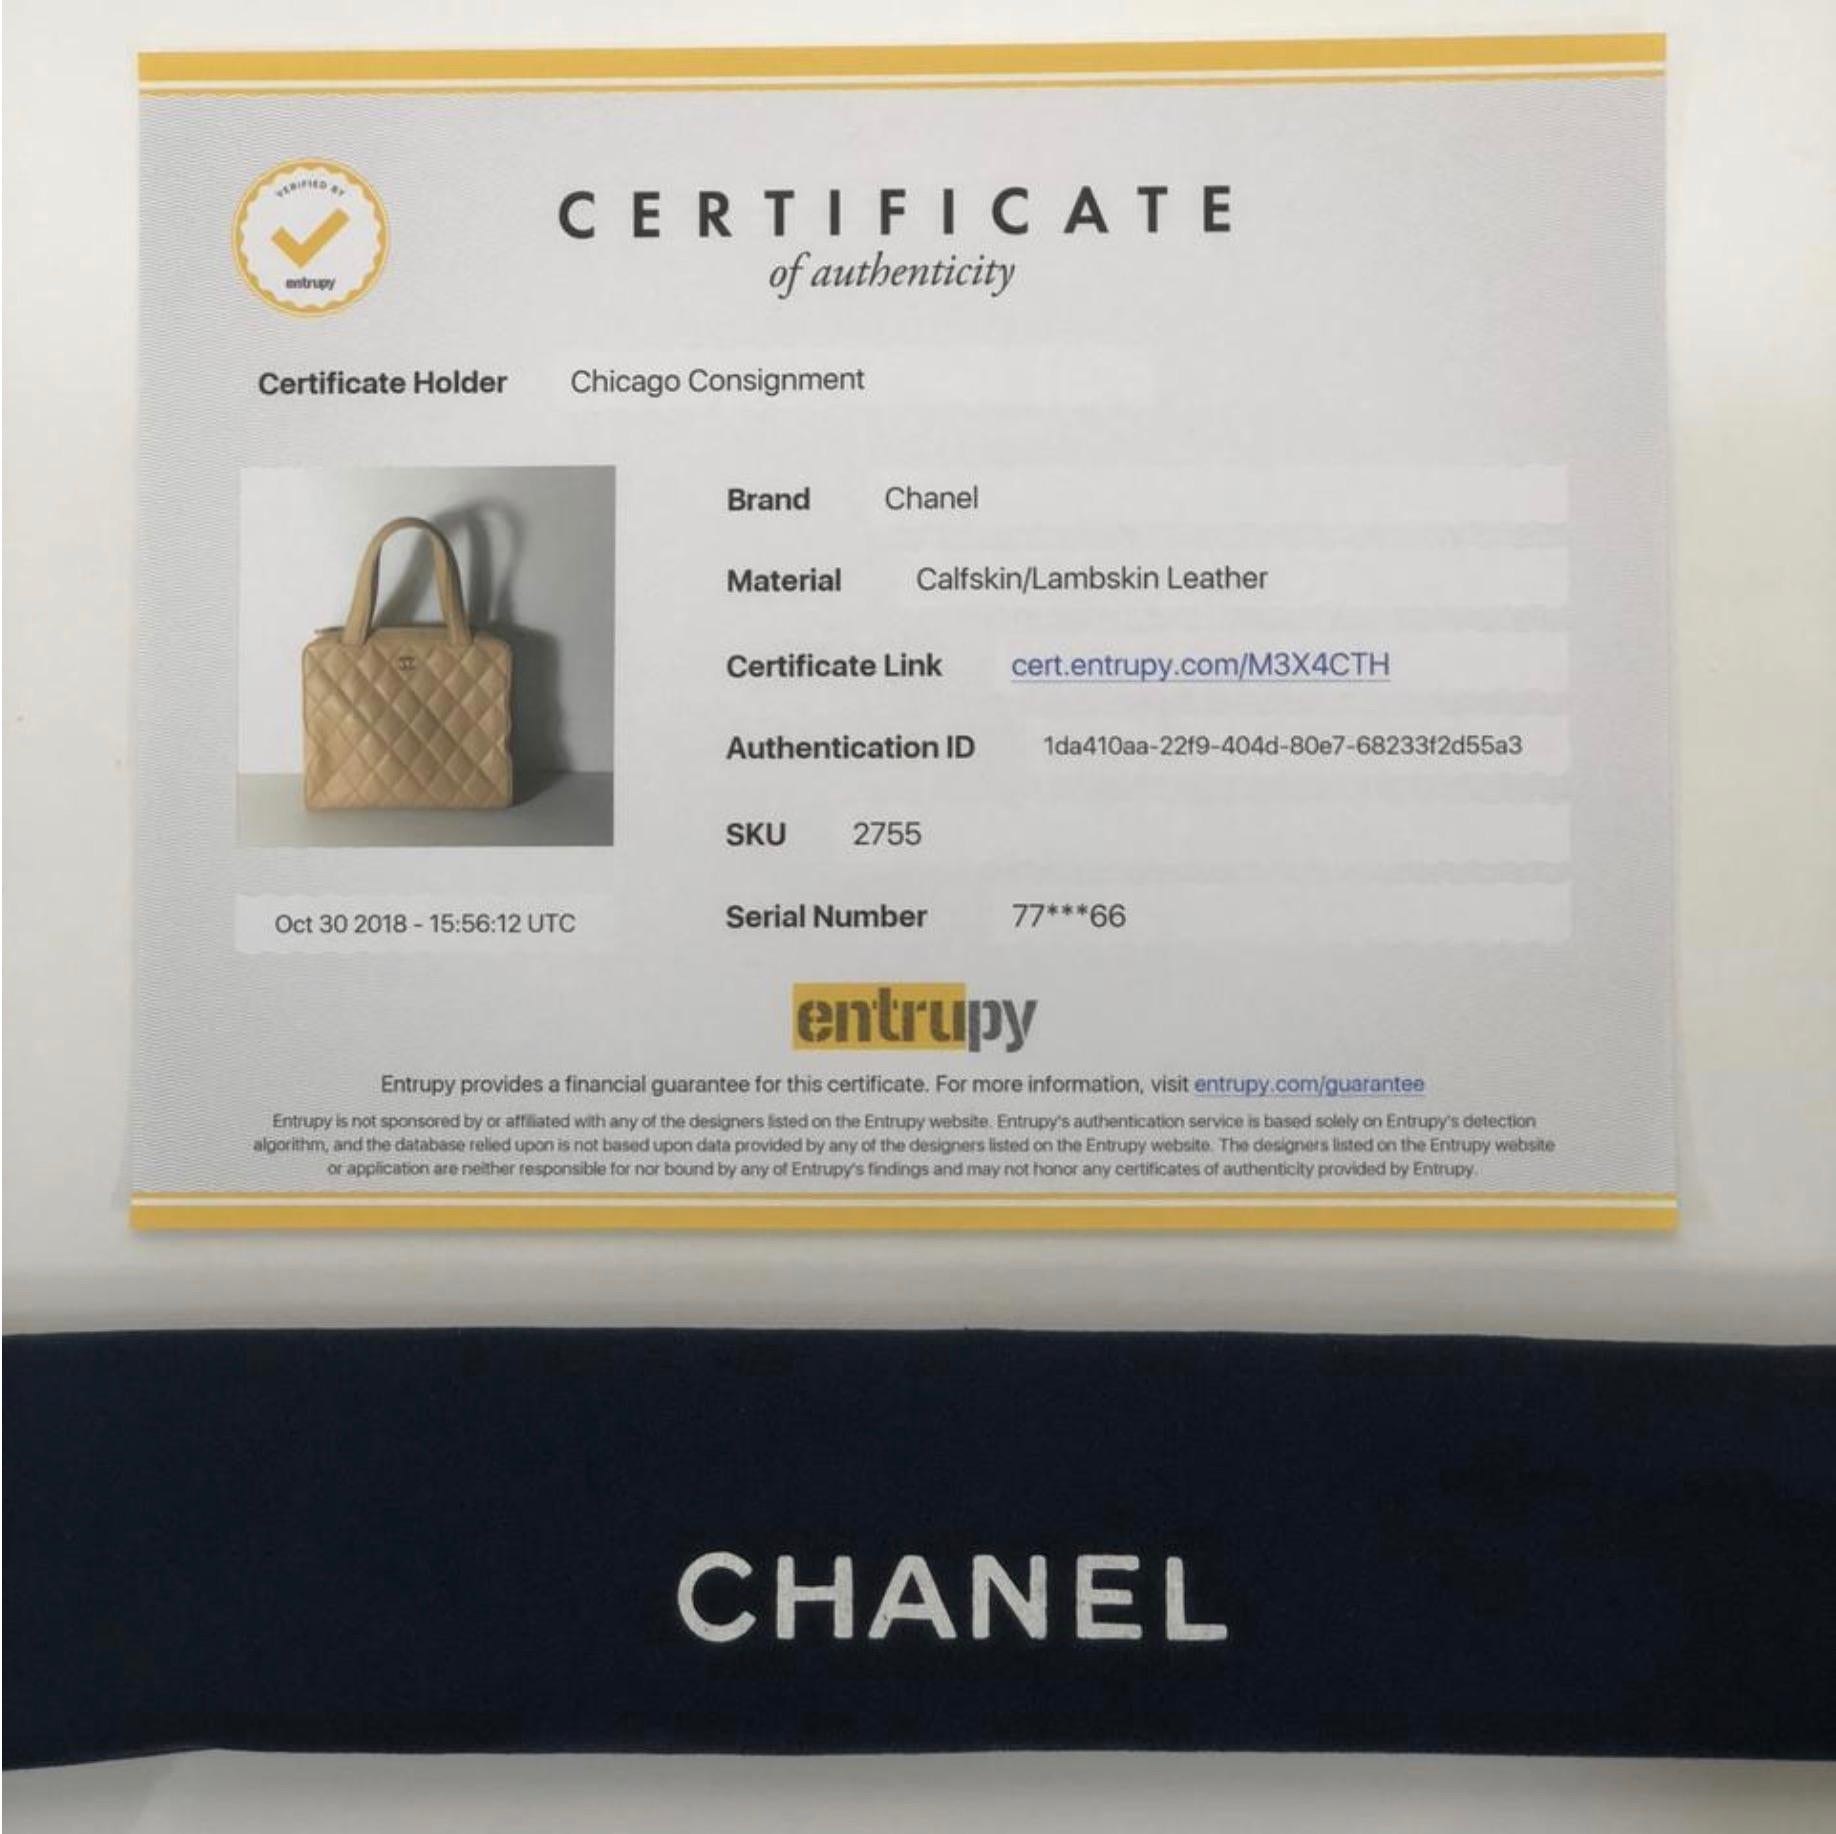 MODEL - Chanel Lambskin Leather Wild Stitch Large Shoulder with Gold Hardware in Beige

CONDITION - Exceptional! No watermarks, no handle darkening, no dryness. Bright and shiny hardware with no tarnishing. No rips, holes, tears, stains or odors.